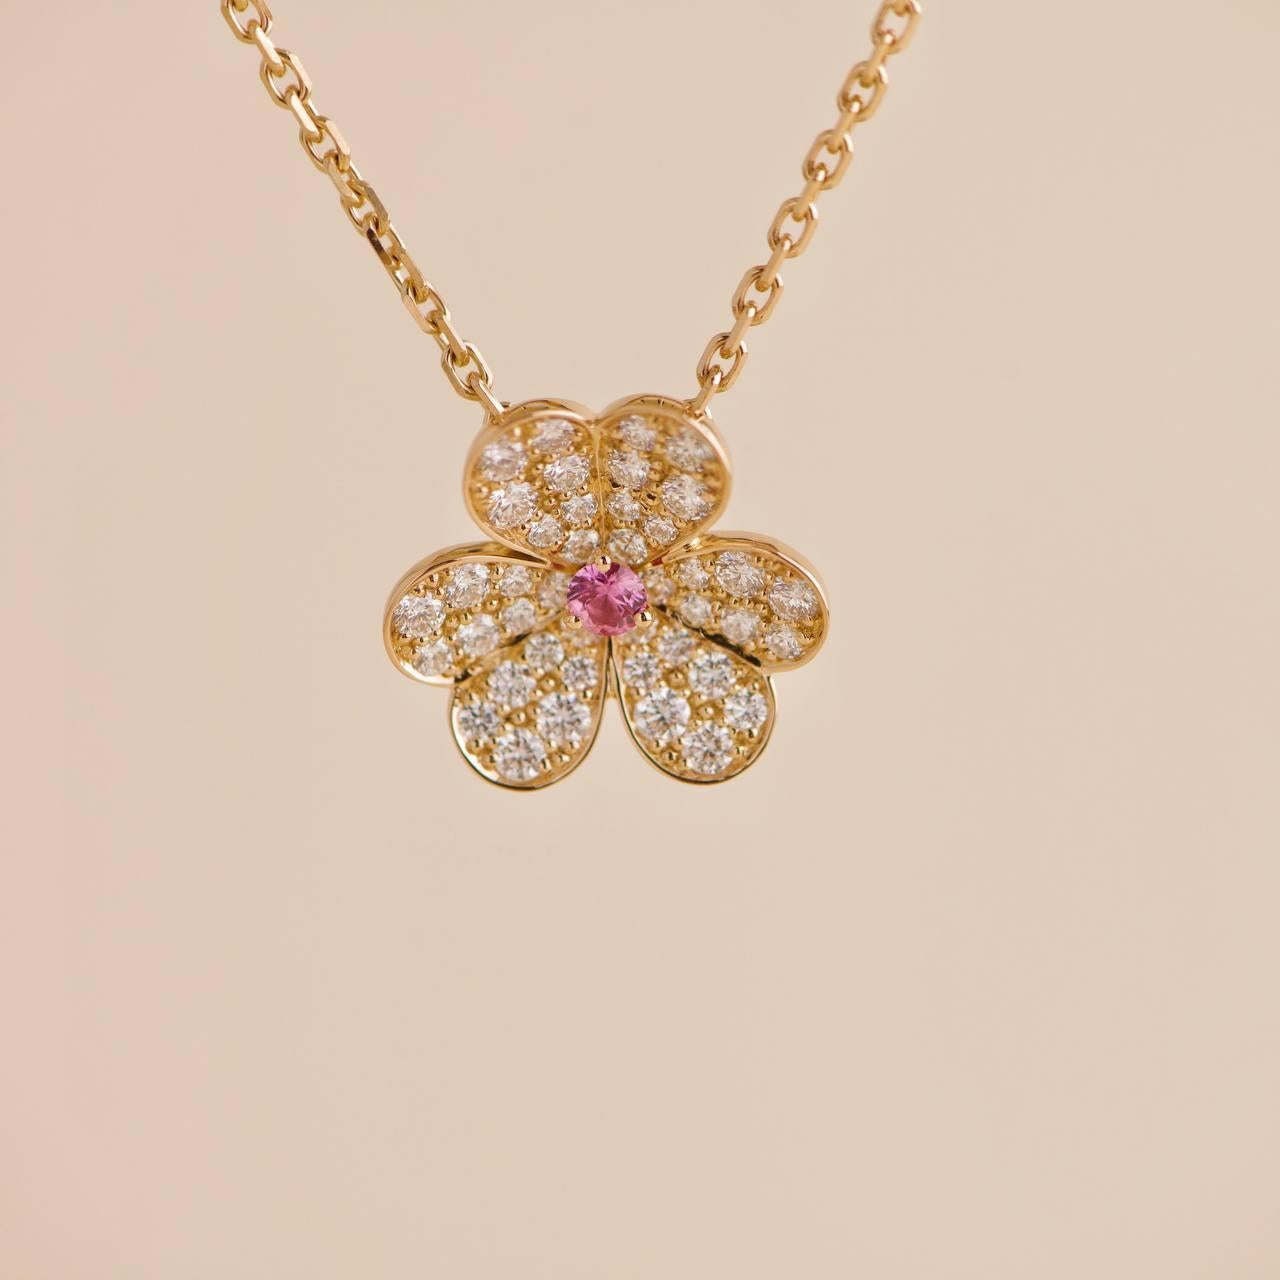 Van Cleef & Arpels Frivole Flower Diamond Pink Sapphire Pendant Necklace In Excellent Condition For Sale In Banbury, GB